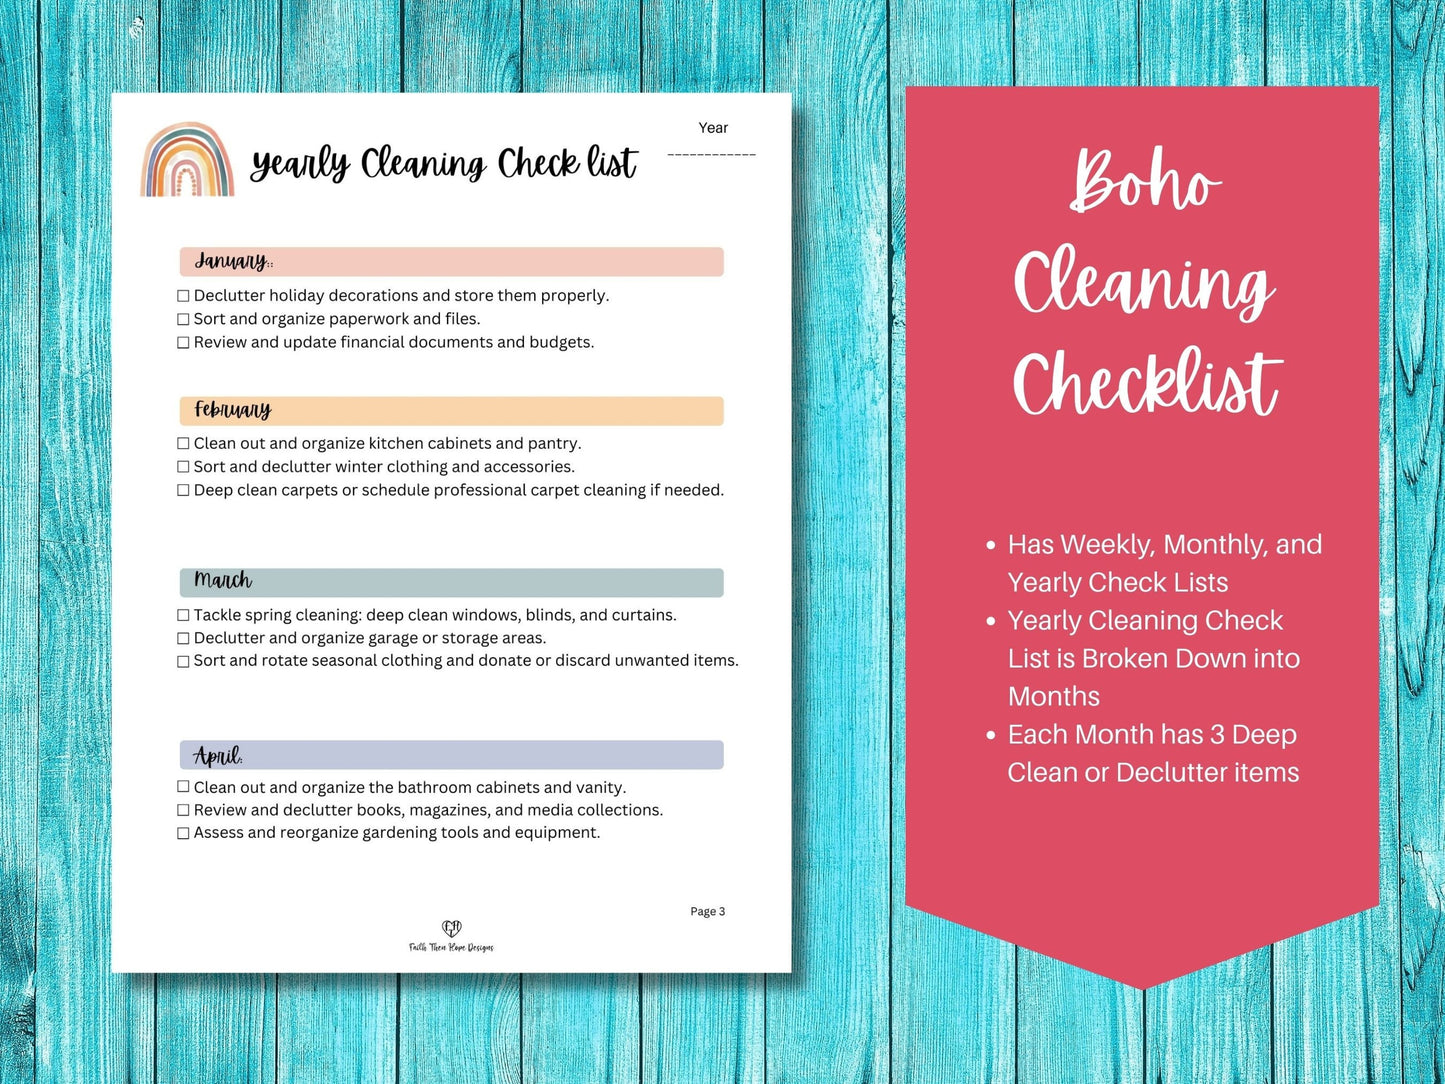 Boho-Inspired Daily, Weekly, Monthly Cleaning Checklist for a Tidy Home, Cleaning Checklist, Cleaning Schedule, Cleaning Planner